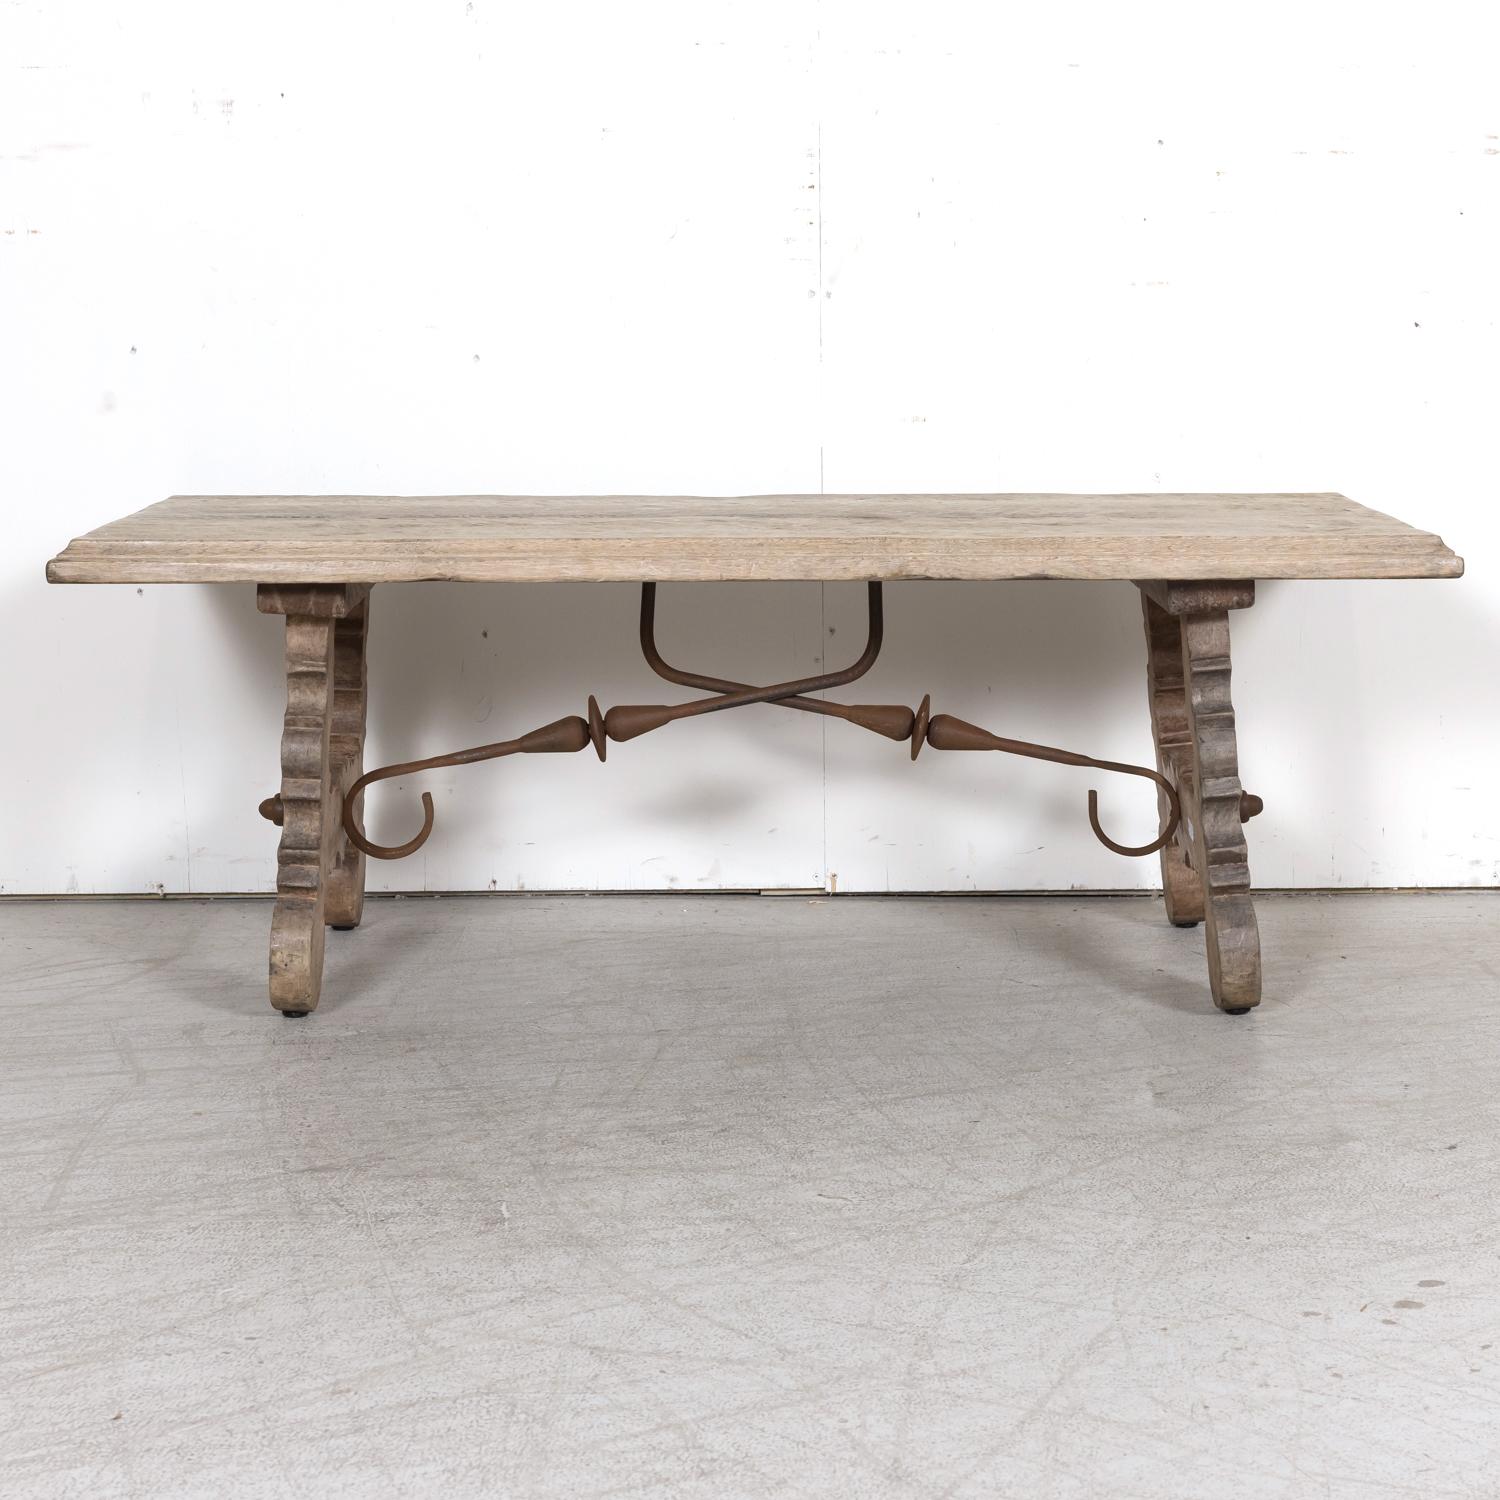 19th Century Spanish Baroque Style Bleached Oak Coffee Table with Iron Stretcher For Sale 13